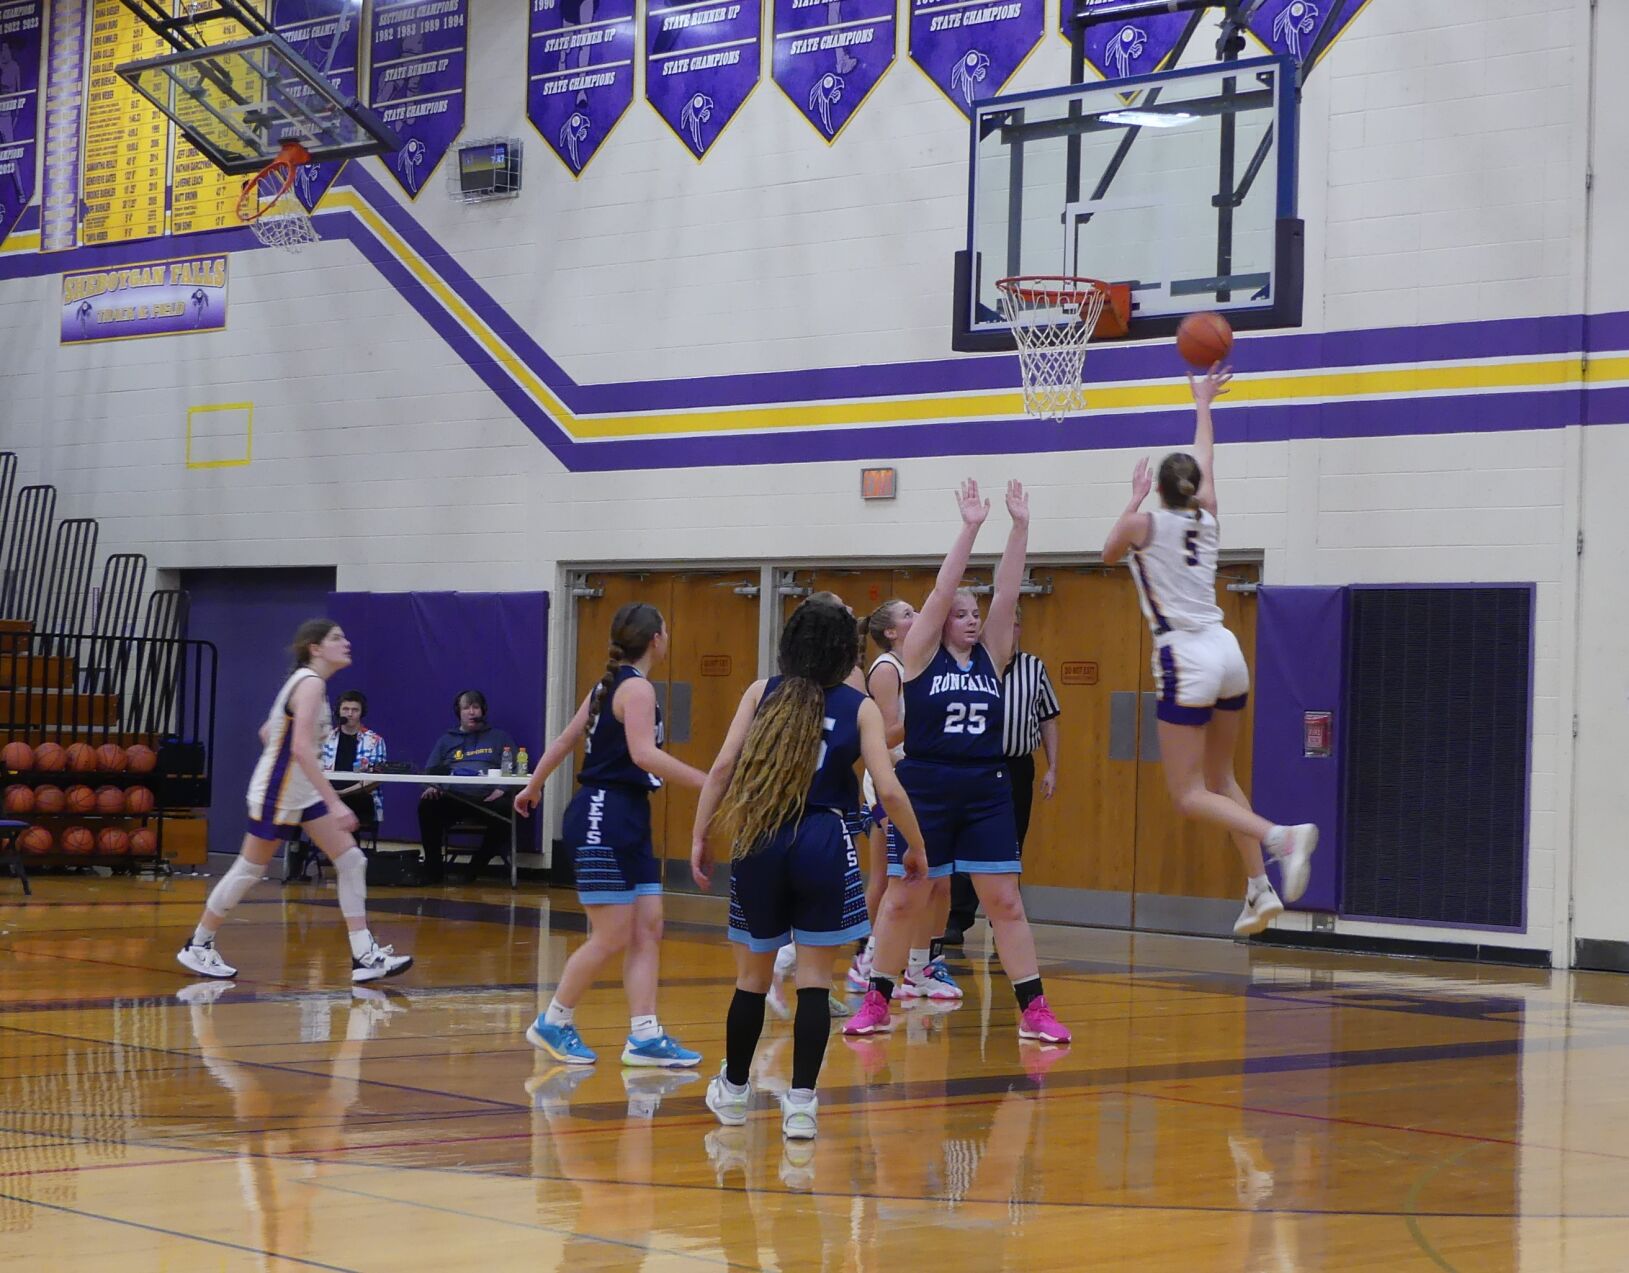 Sheboygan Falls Falcons Extend Undefeated Streak to 12-0 with a Commanding 77-36 Victory